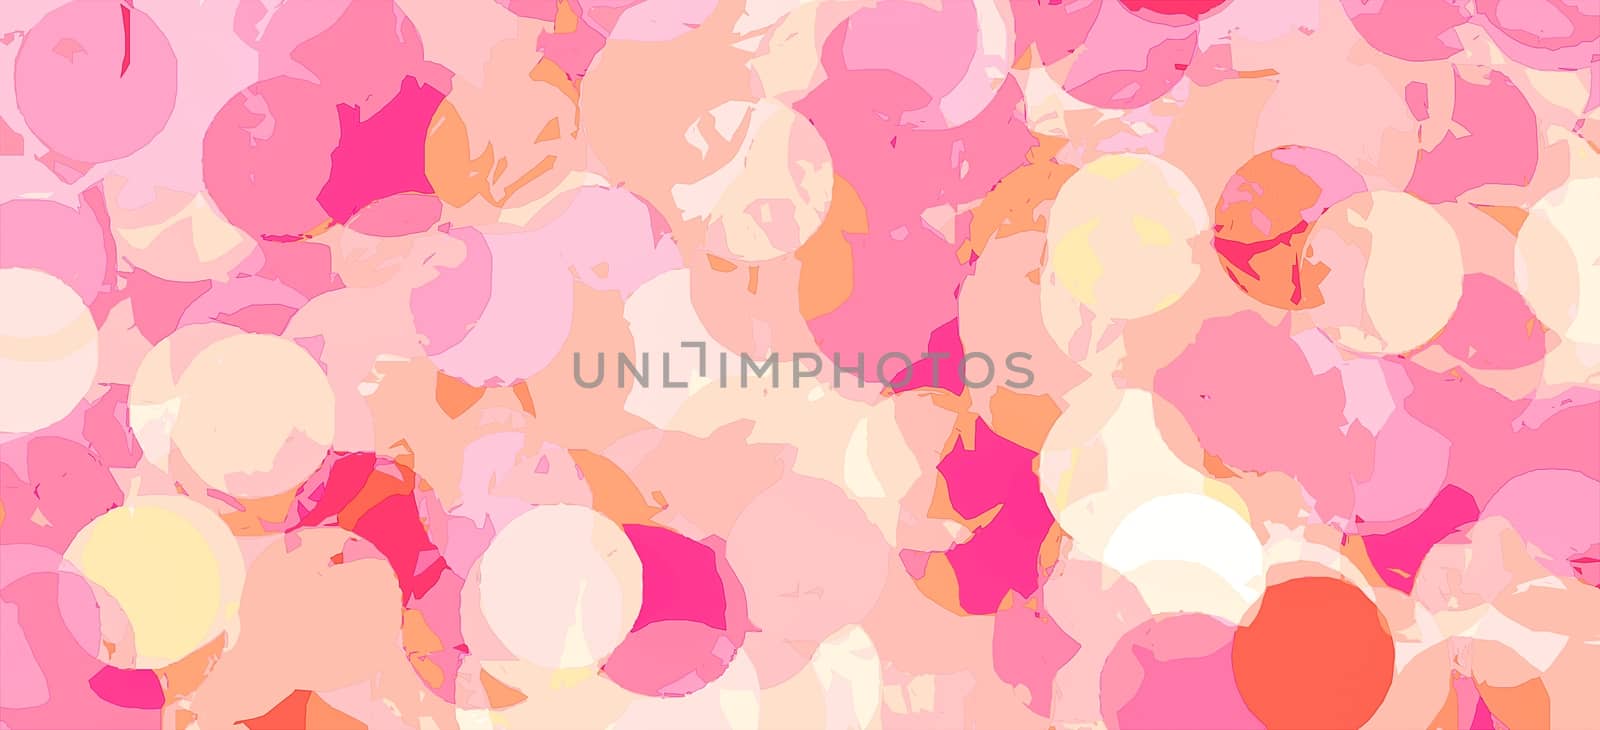 circle abstract background in pink by Timmi